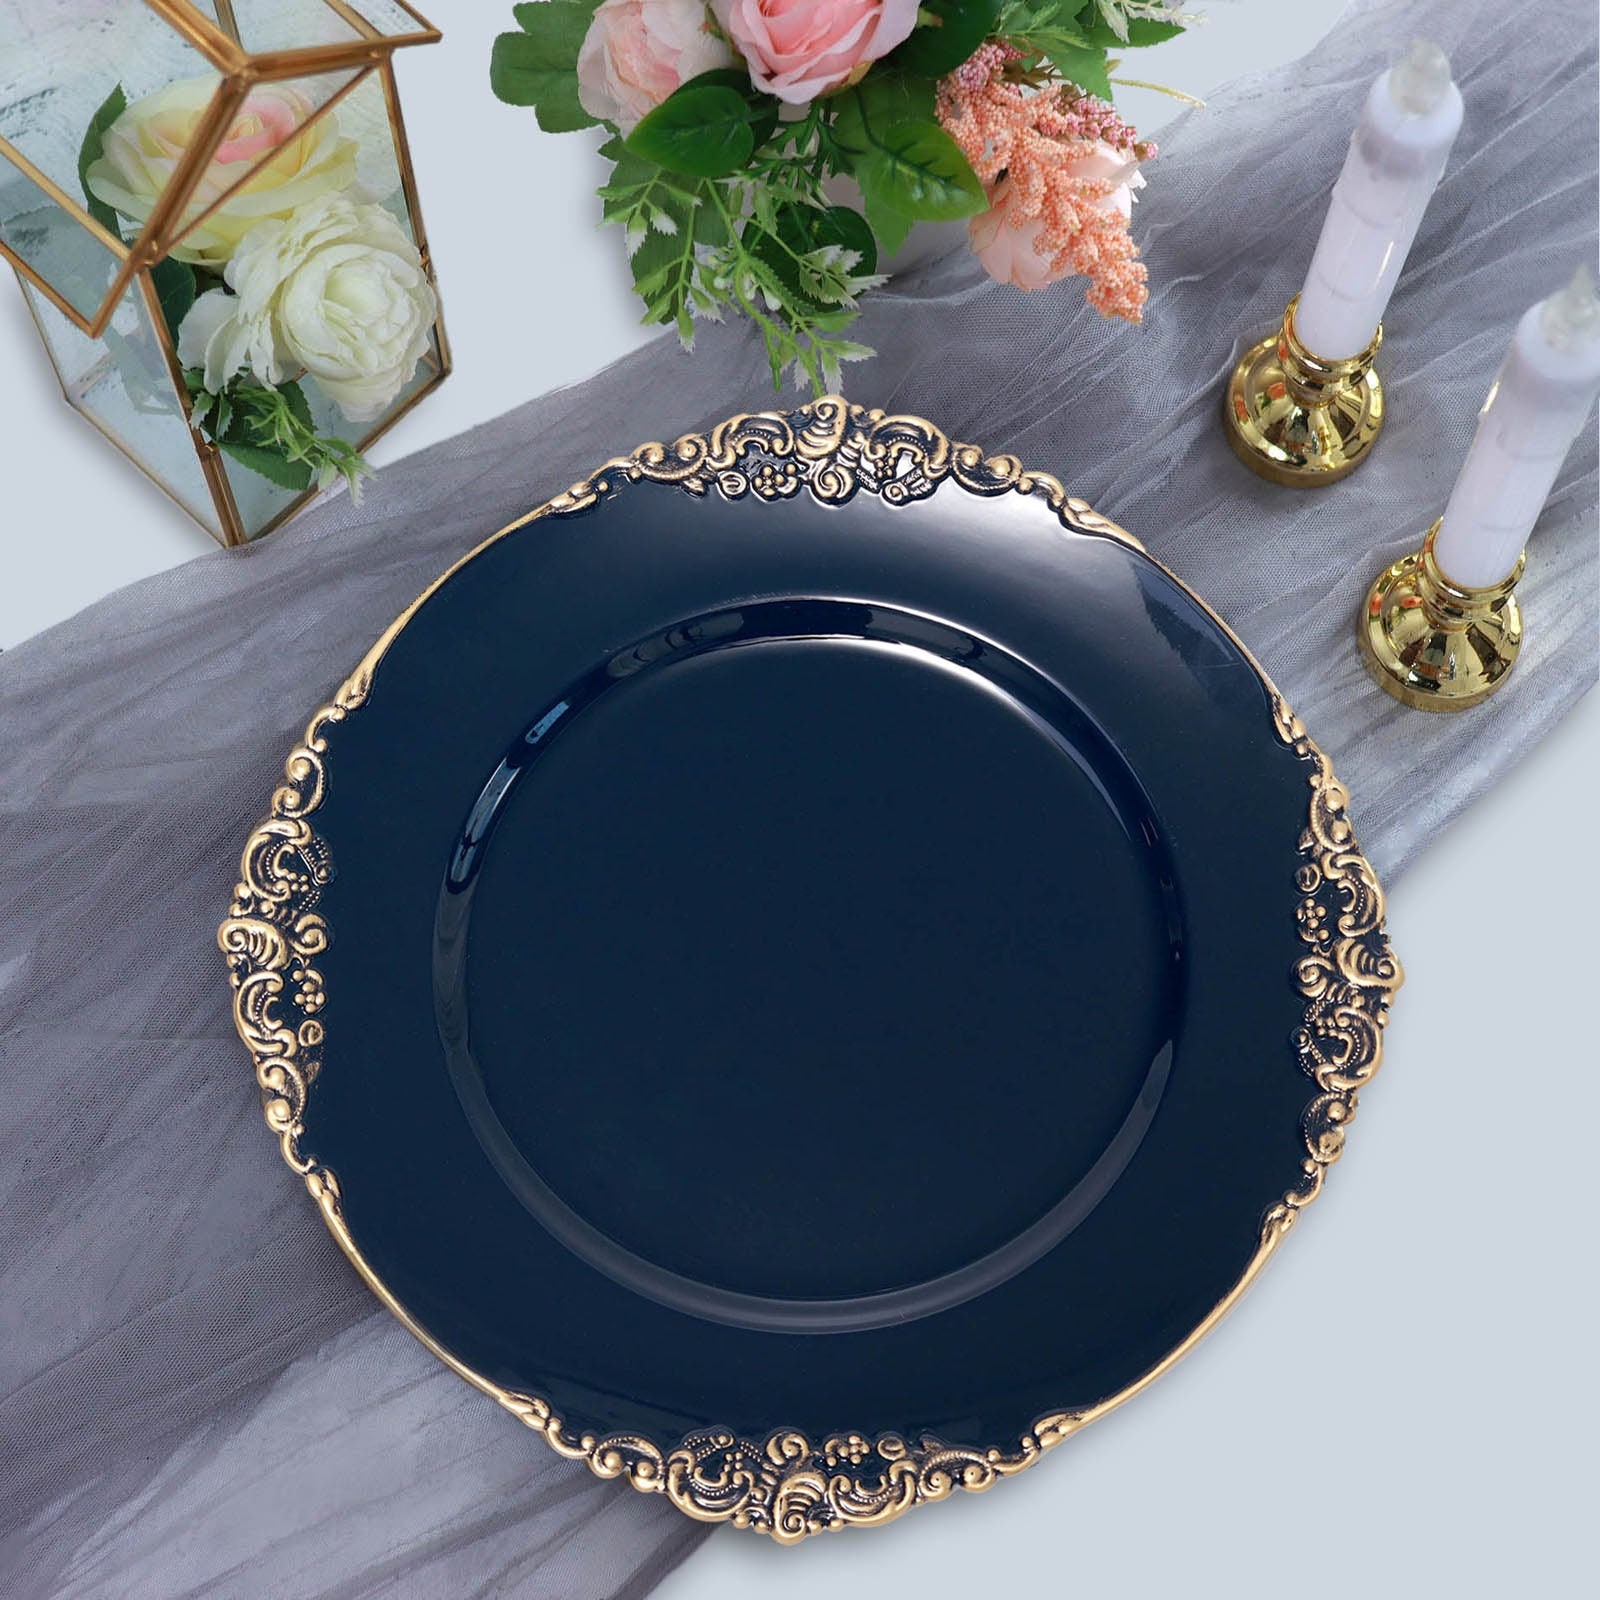 6 ROSE GOLD 13" Round with Embossed Rim Charger Plates Wedding Dinner Supplies 